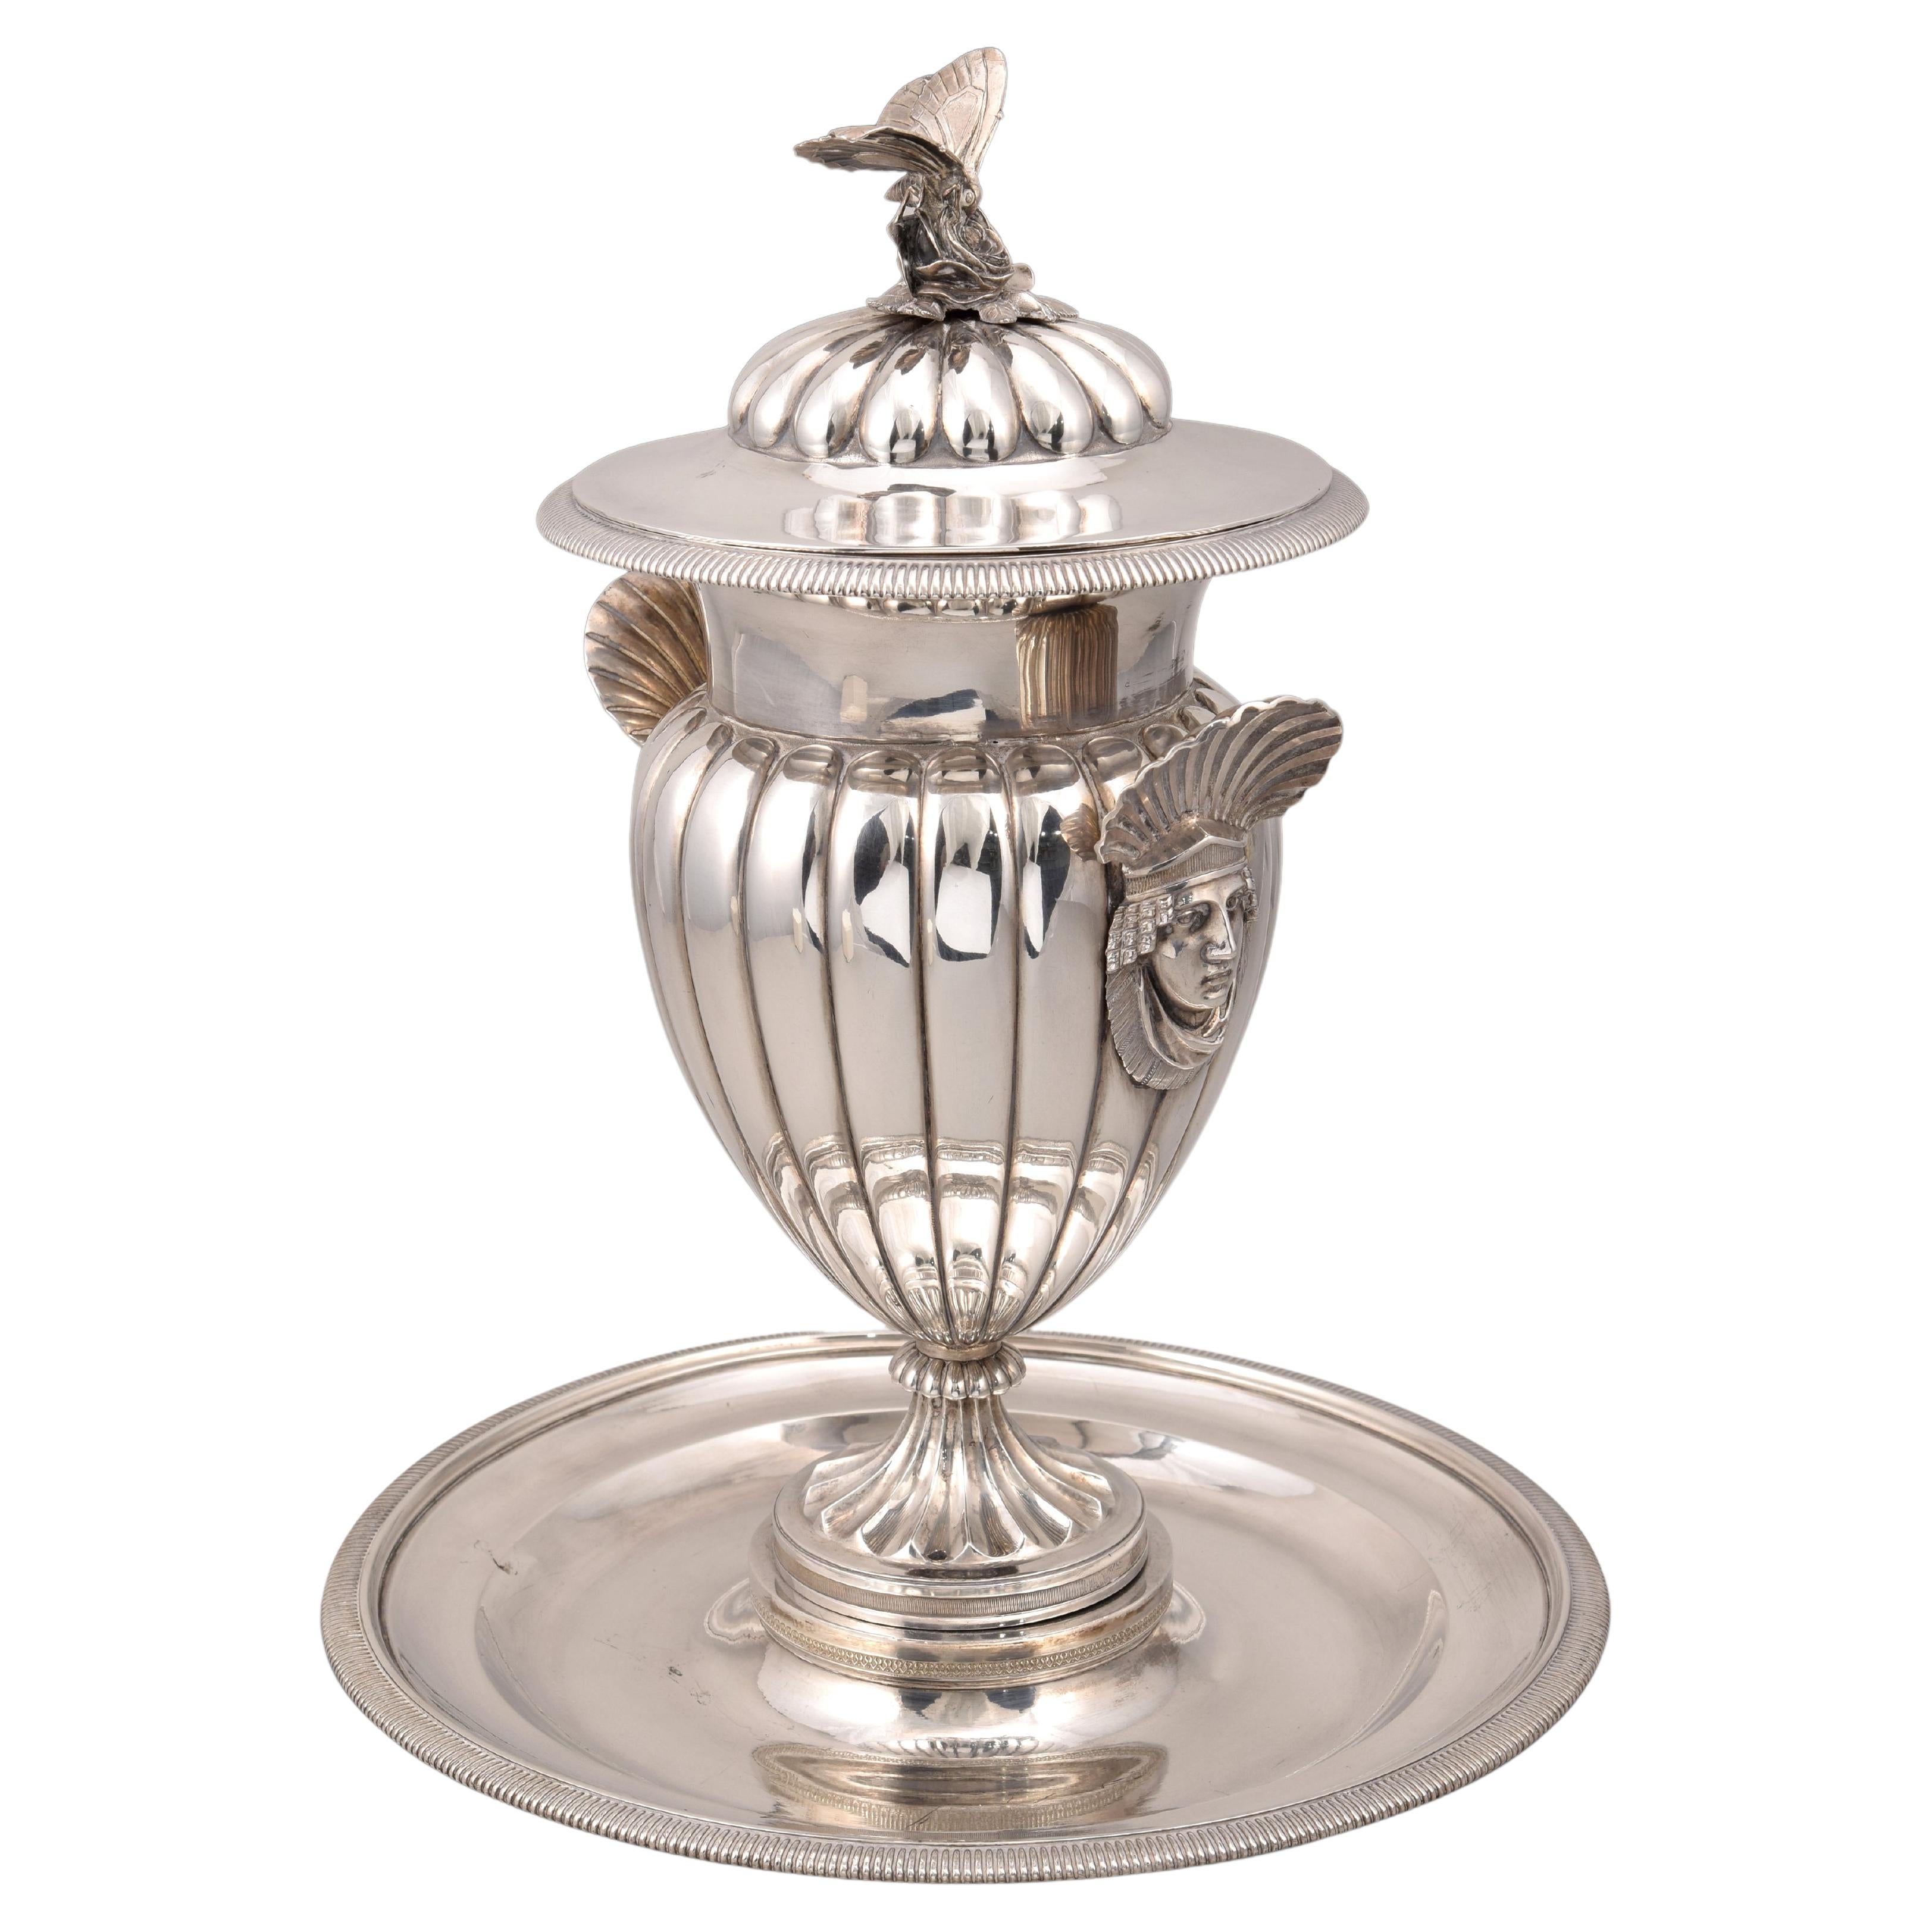 Cup with tray. Royal Silver Factory of Antonio Martínez. Madrid, Spain, 1830s.